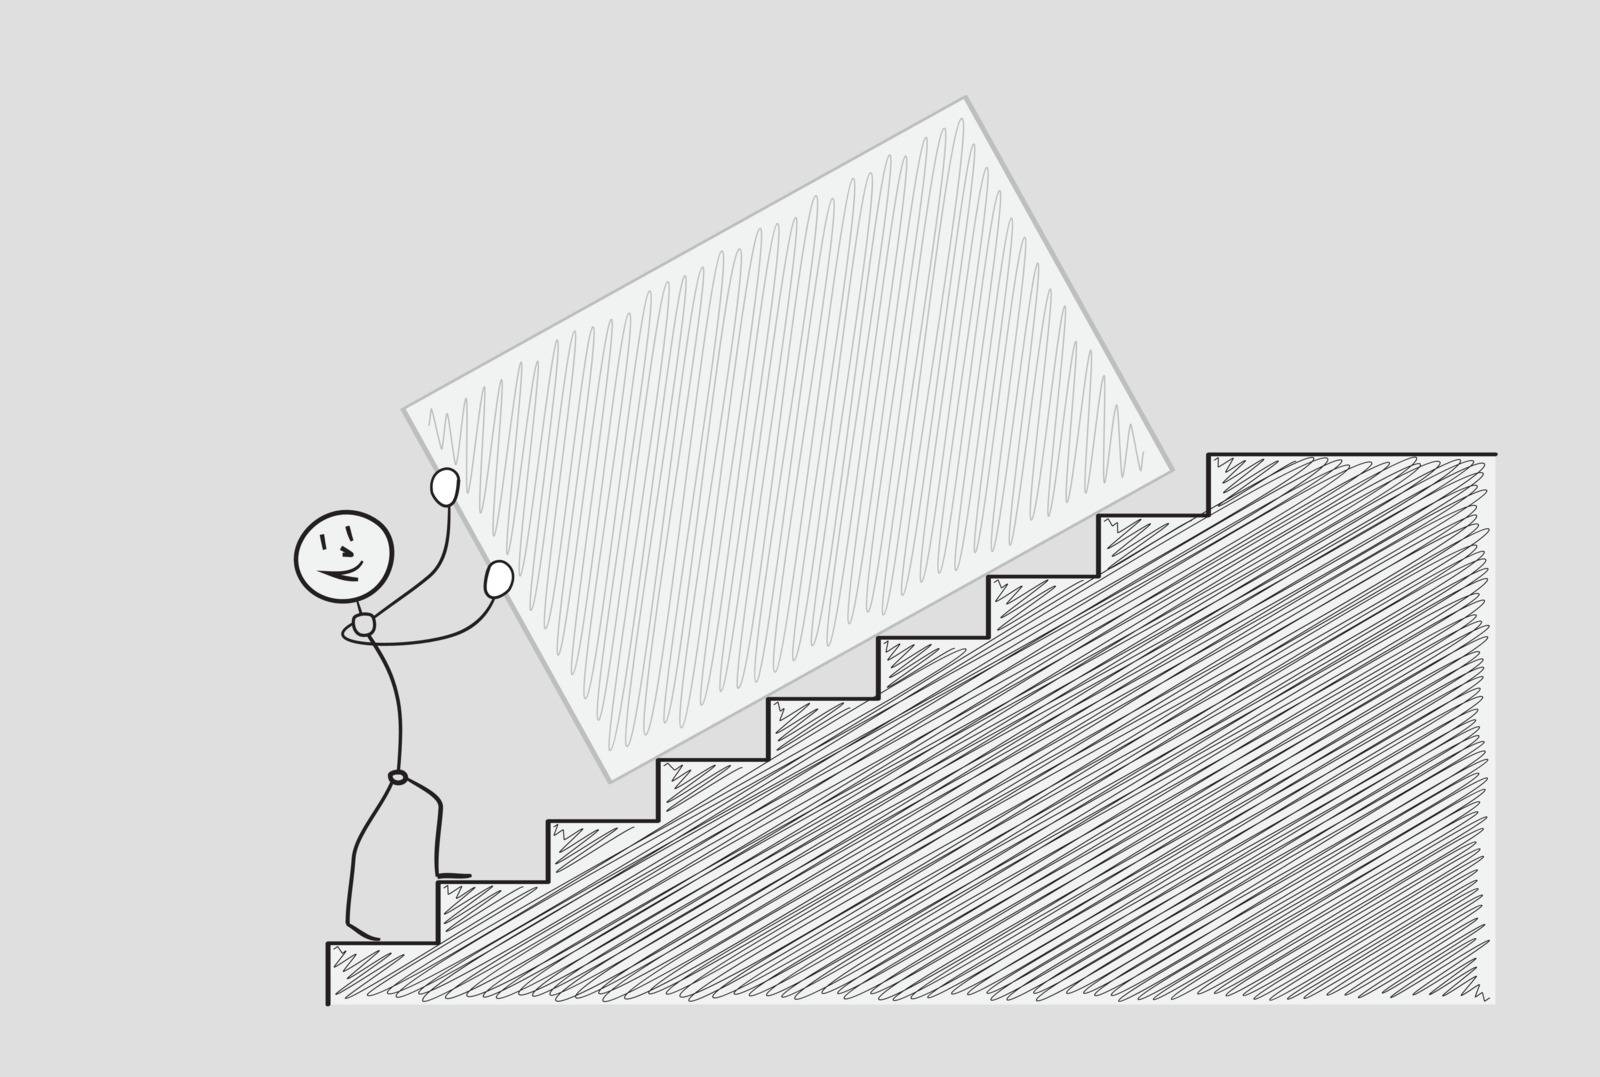 happy man pushing box up the stairs, crosshatched image